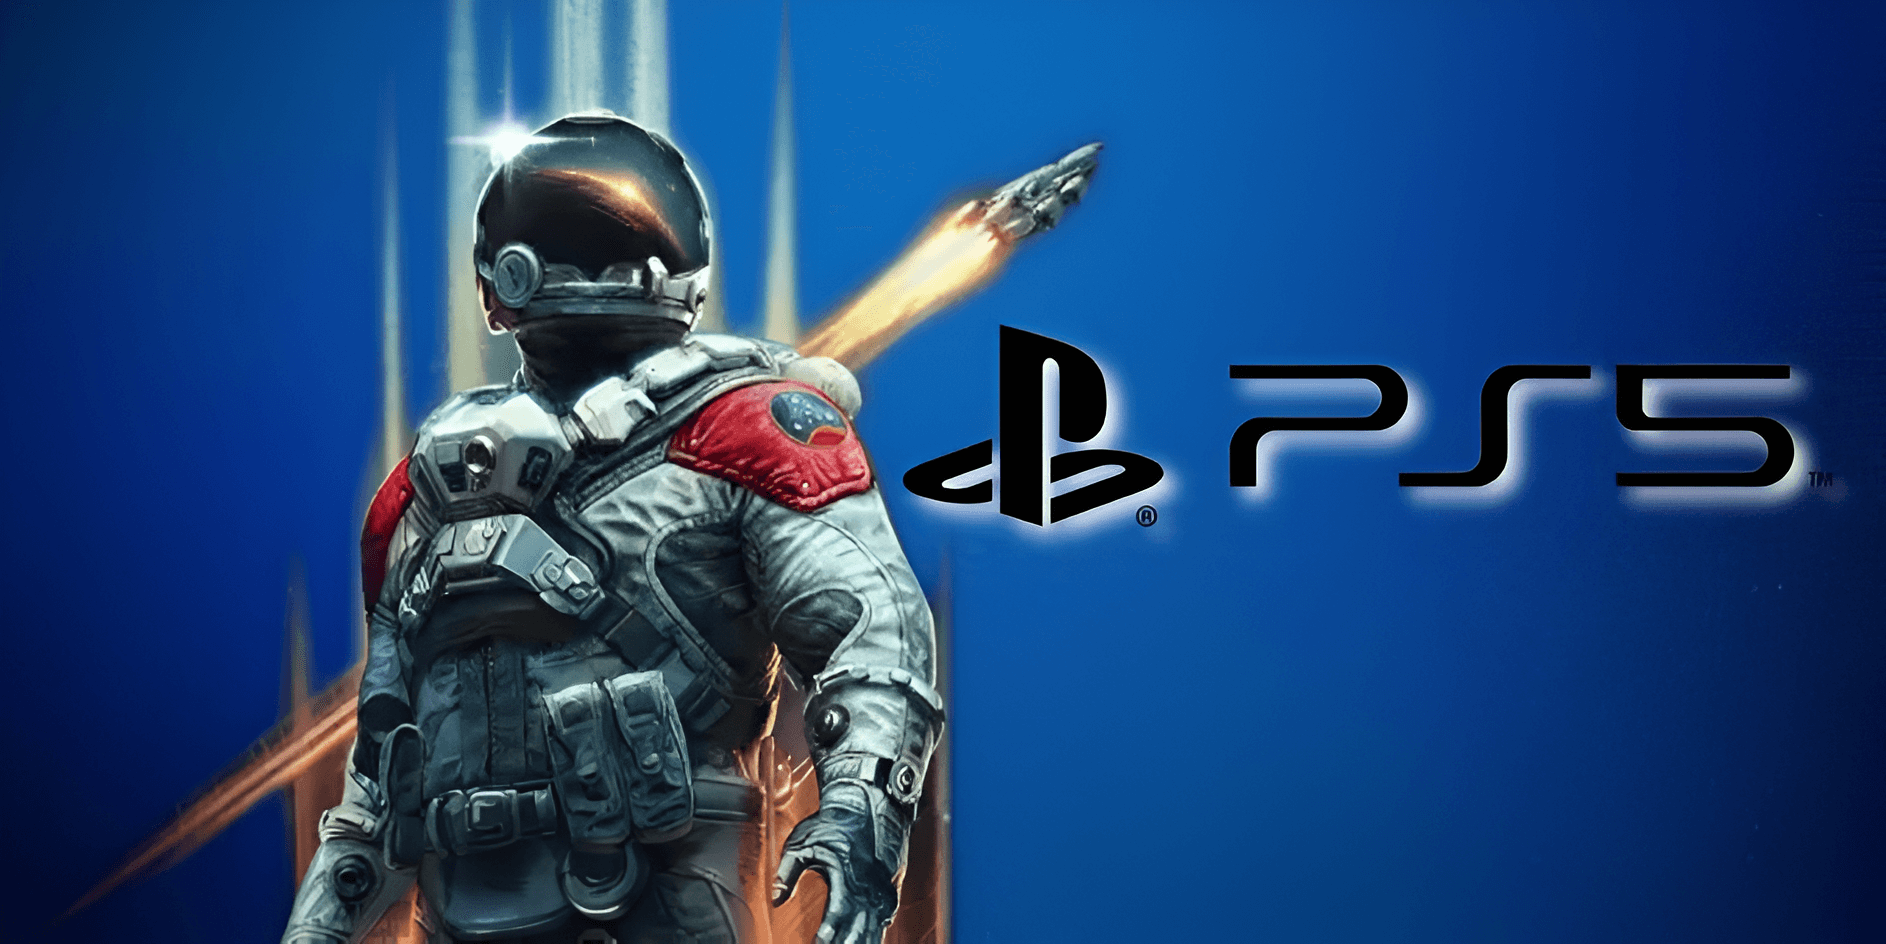 ps5-logo-starfield-character-blue-background (1)